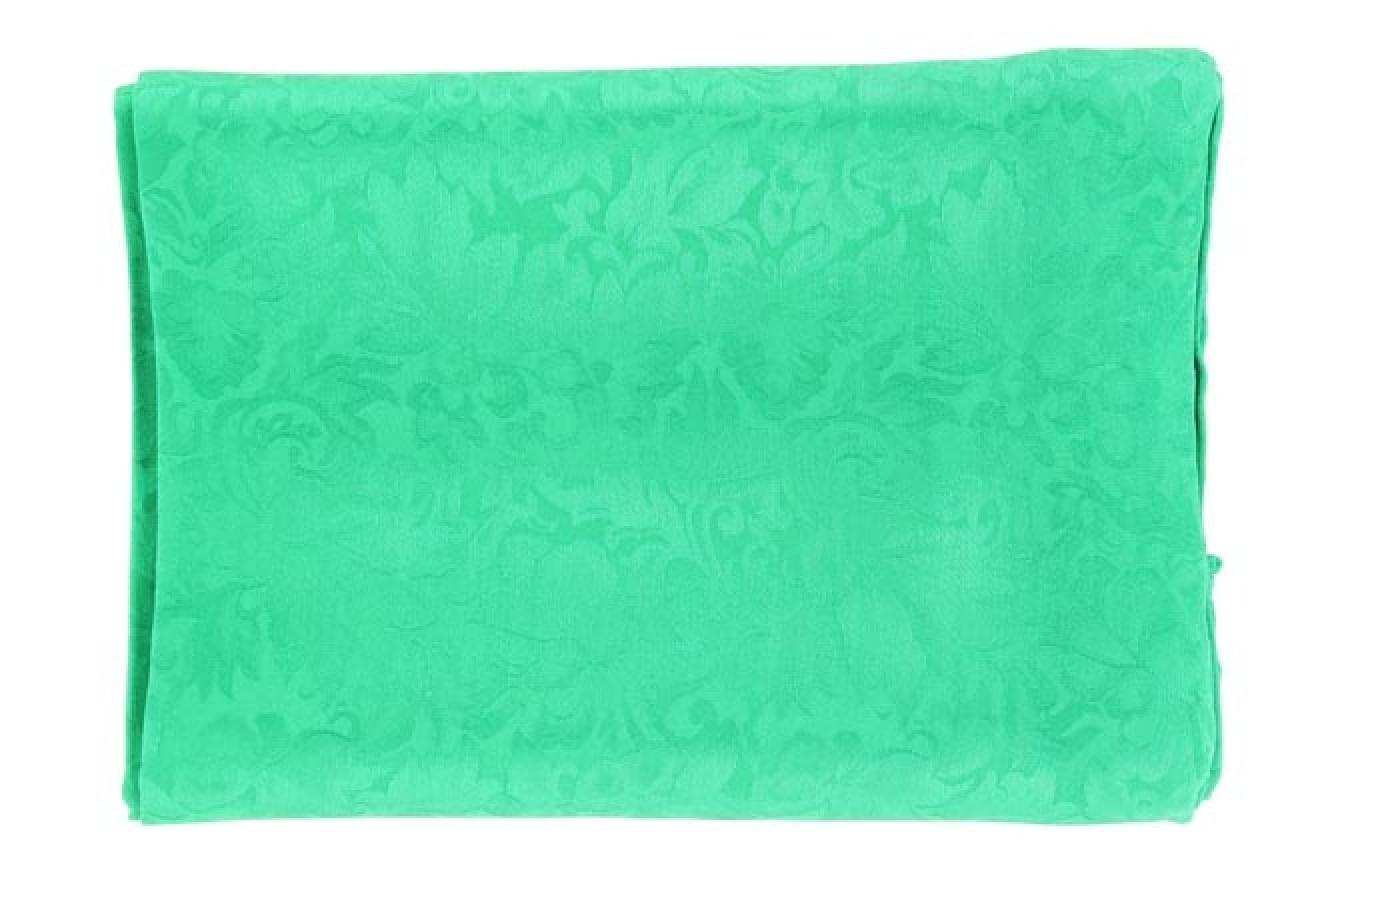 M&F Western Products Jacquard Rags Green